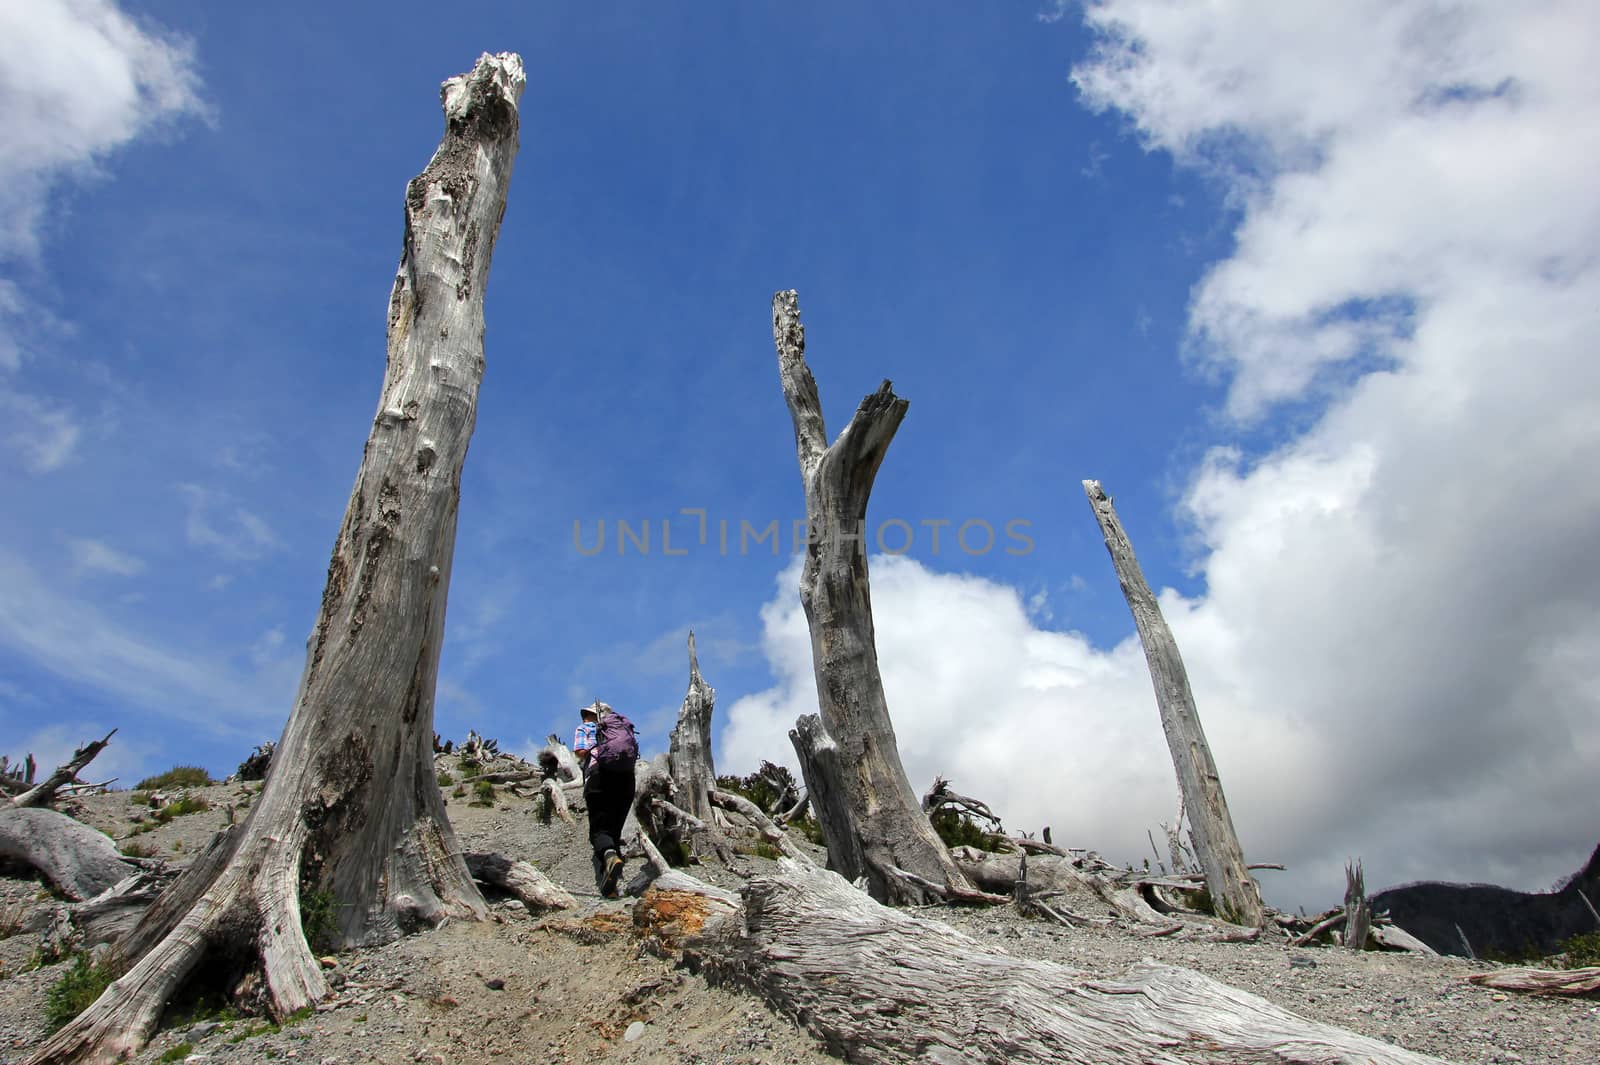 Dead trees from eruption of Chaiten volcano, Chile by cicloco